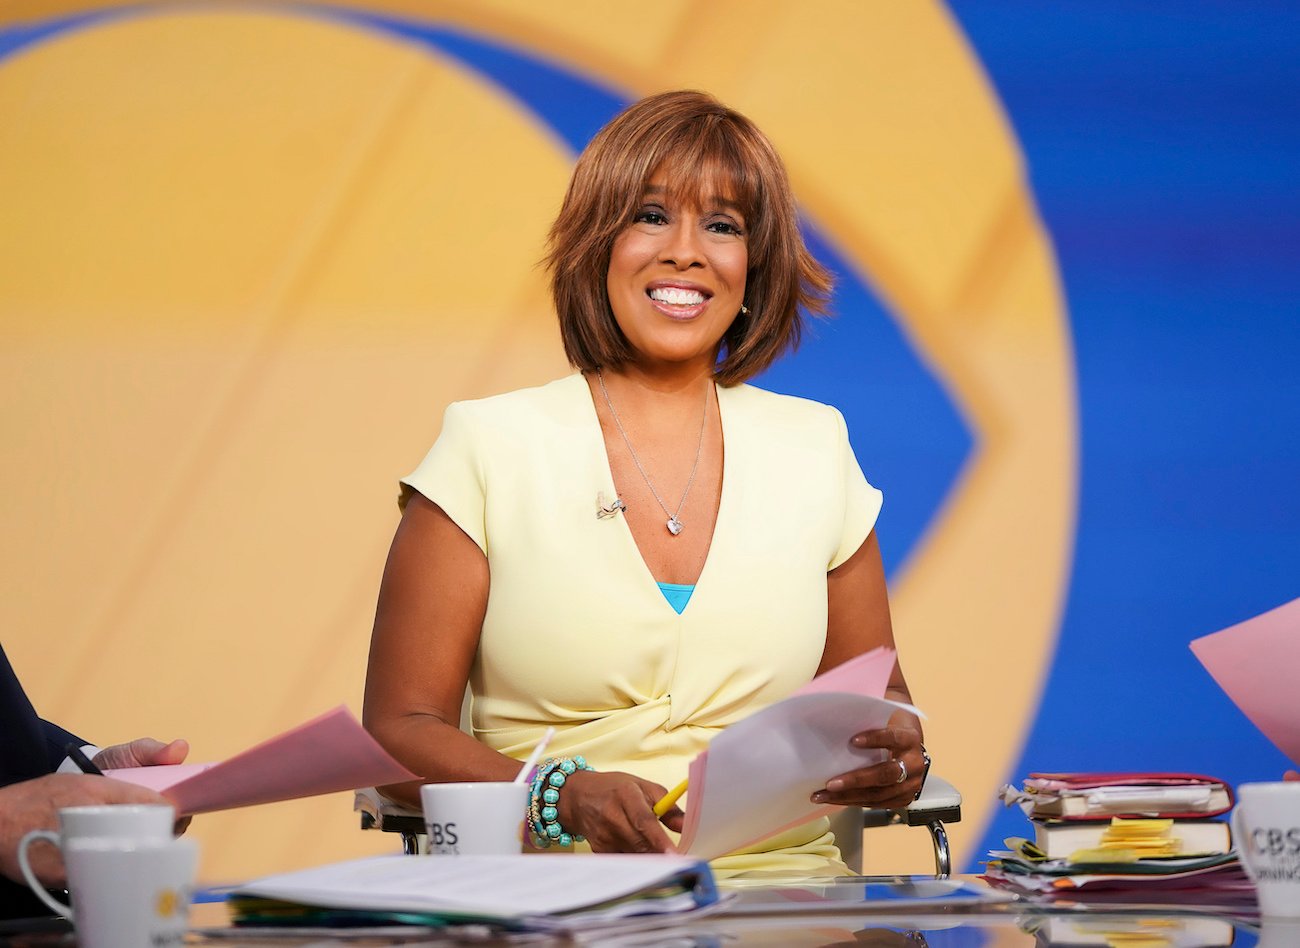 Gayle King smiles wearing a yellow outfit on 'CBS This Morning'